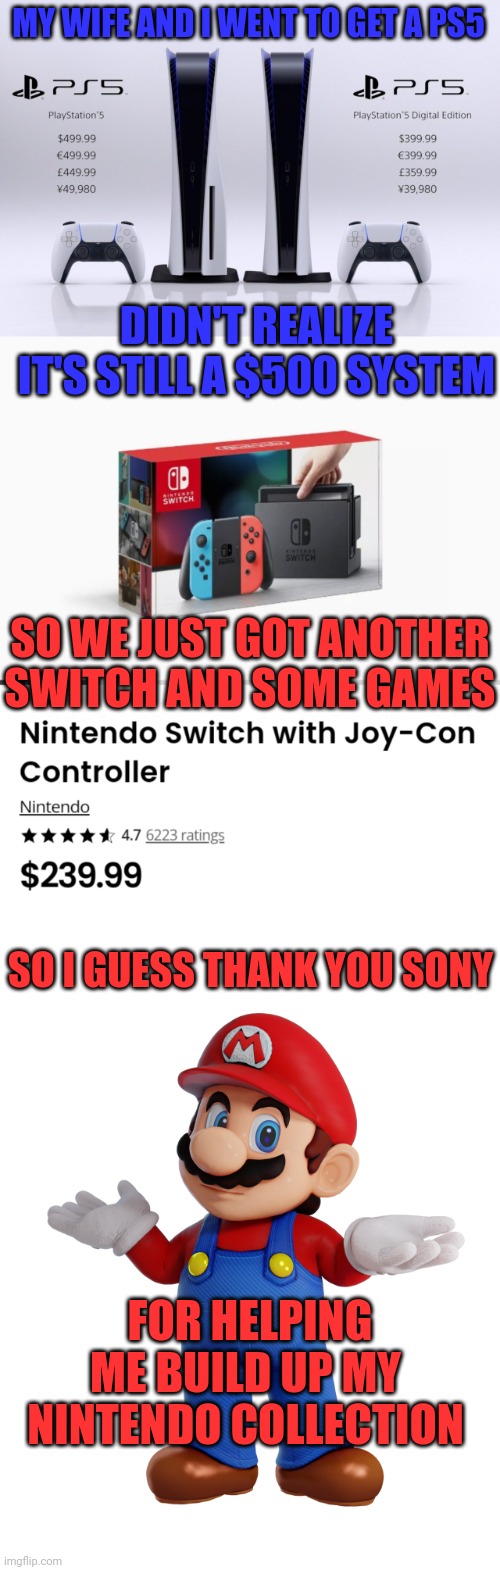 I'M OK WITH MORE SWITCH GAMES! | MY WIFE AND I WENT TO GET A PS5; DIDN'T REALIZE IT'S STILL A $500 SYSTEM; SO WE JUST GOT ANOTHER SWITCH AND SOME GAMES; SO I GUESS THANK YOU SONY; FOR HELPING ME BUILD UP MY NINTENDO COLLECTION | image tagged in nintendo switch,ps5,playstation,super mario,nintendo | made w/ Imgflip meme maker